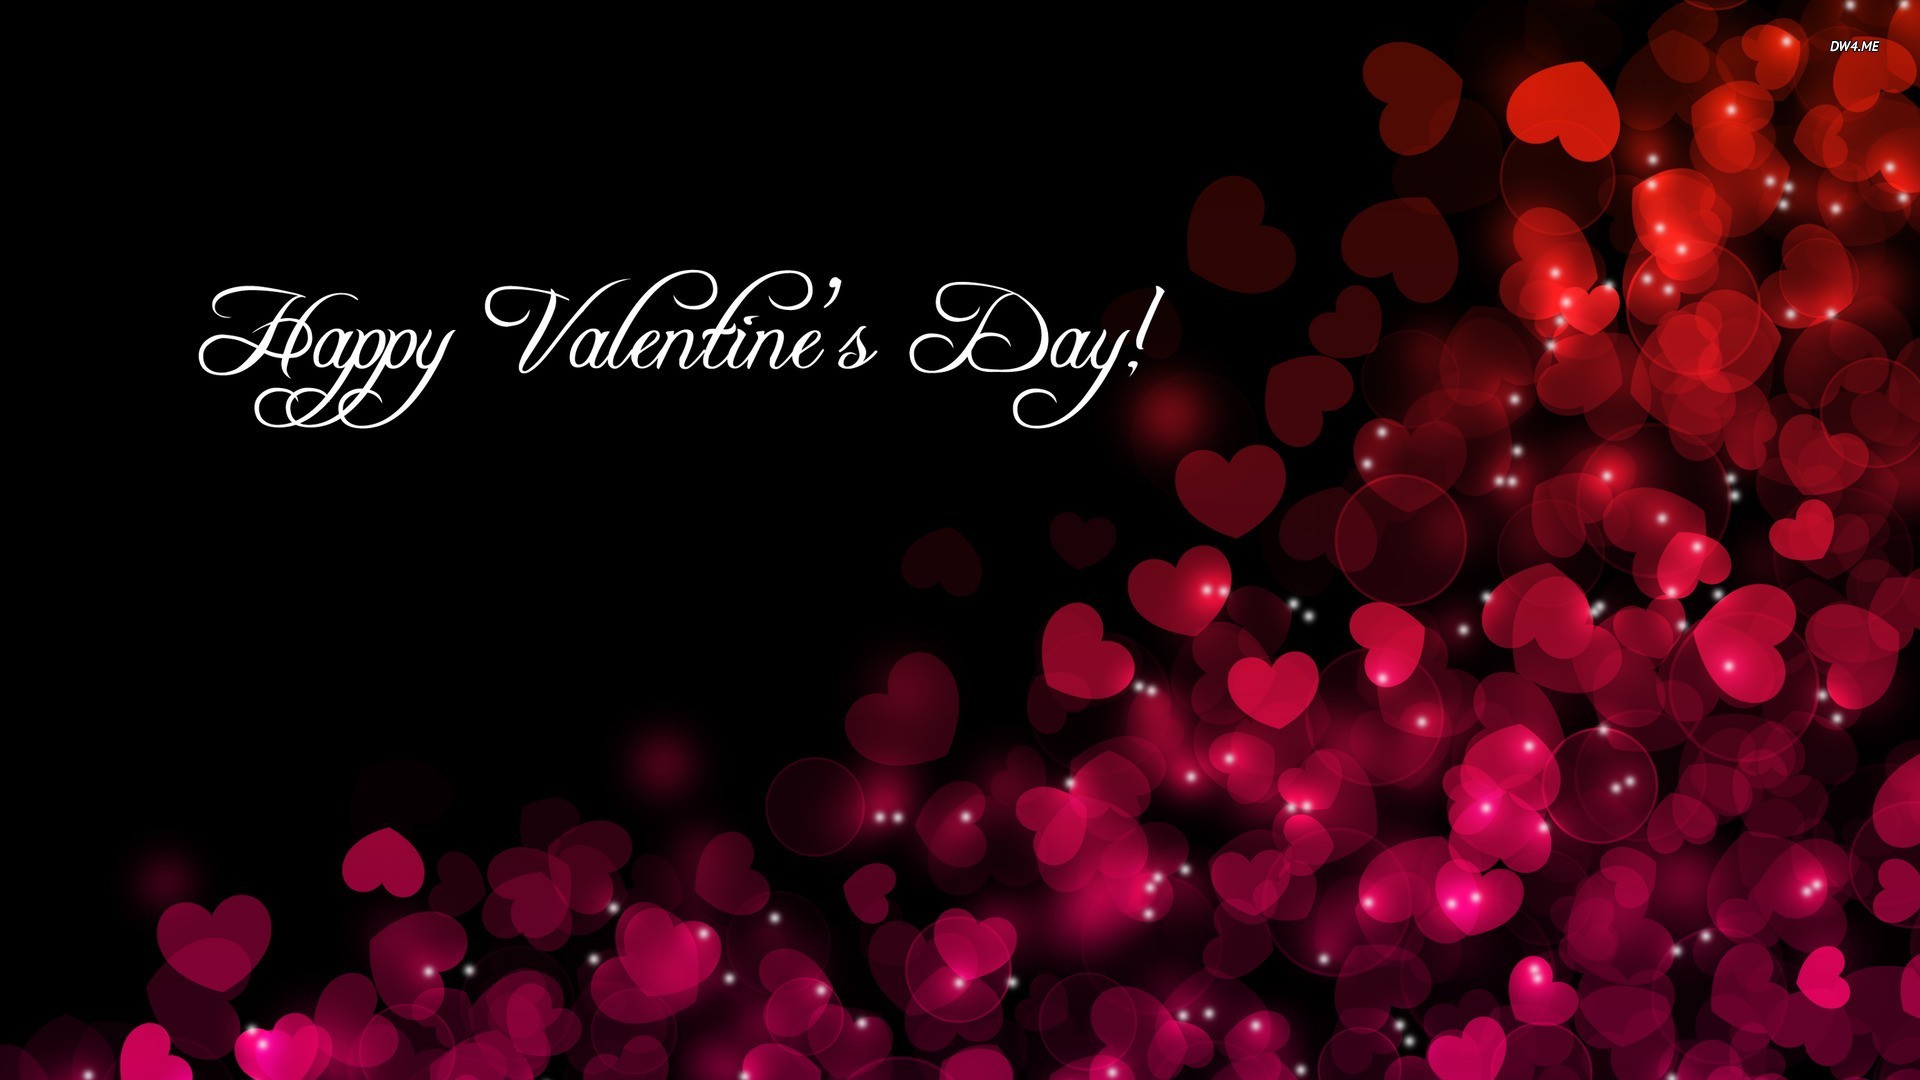 63+ Happy Valentines Day Images, Backgrounds & Wallpapers